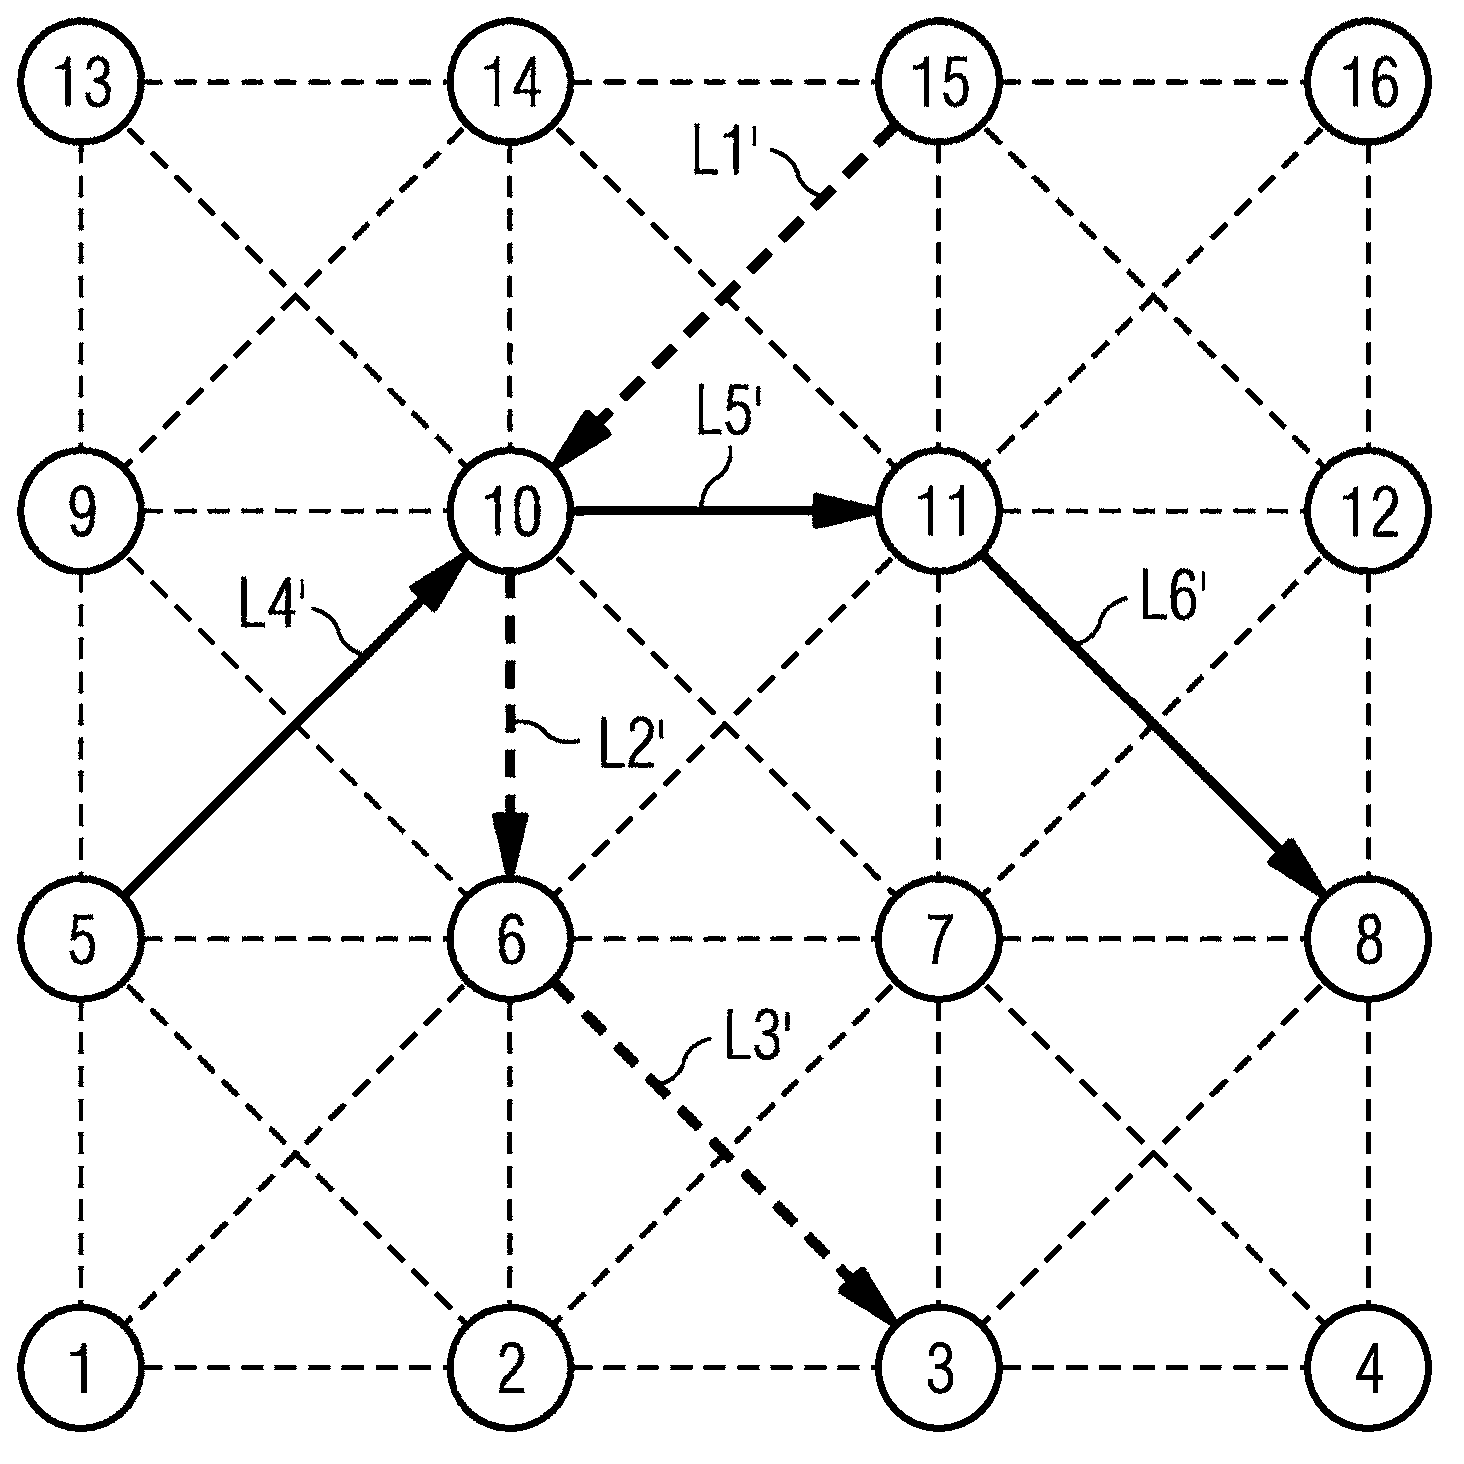 Method for associating time slots with links between network nodes of a wireless interconnected network